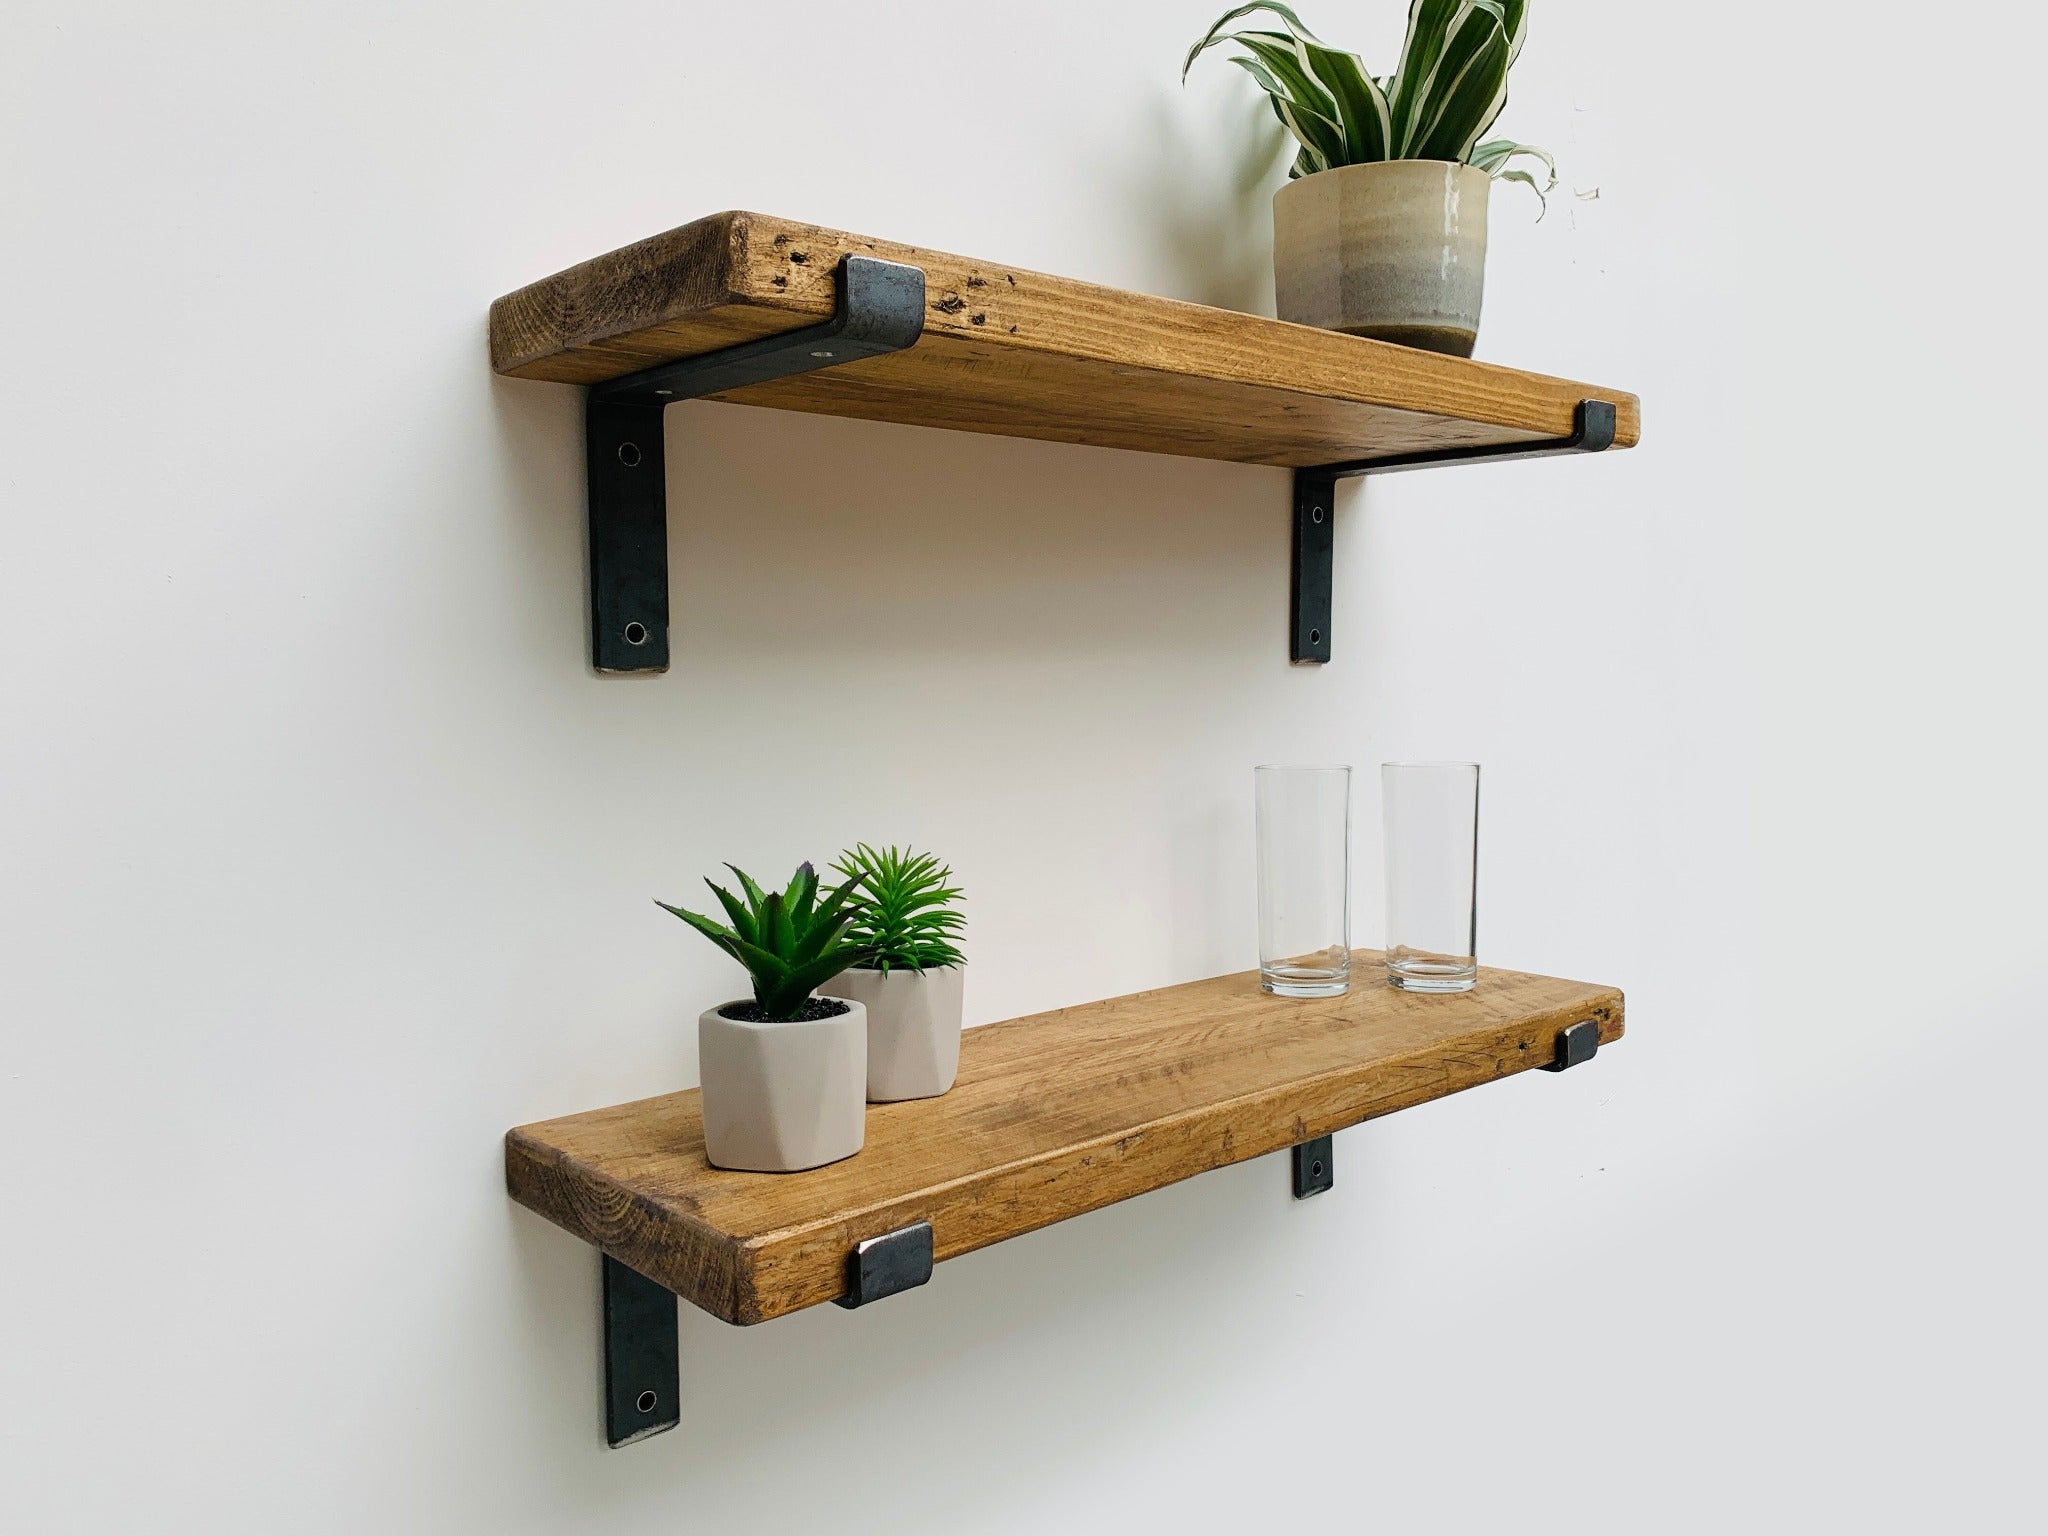 Rustic Wood Thin Shelf with Industrial S-Bend Metal Brackets